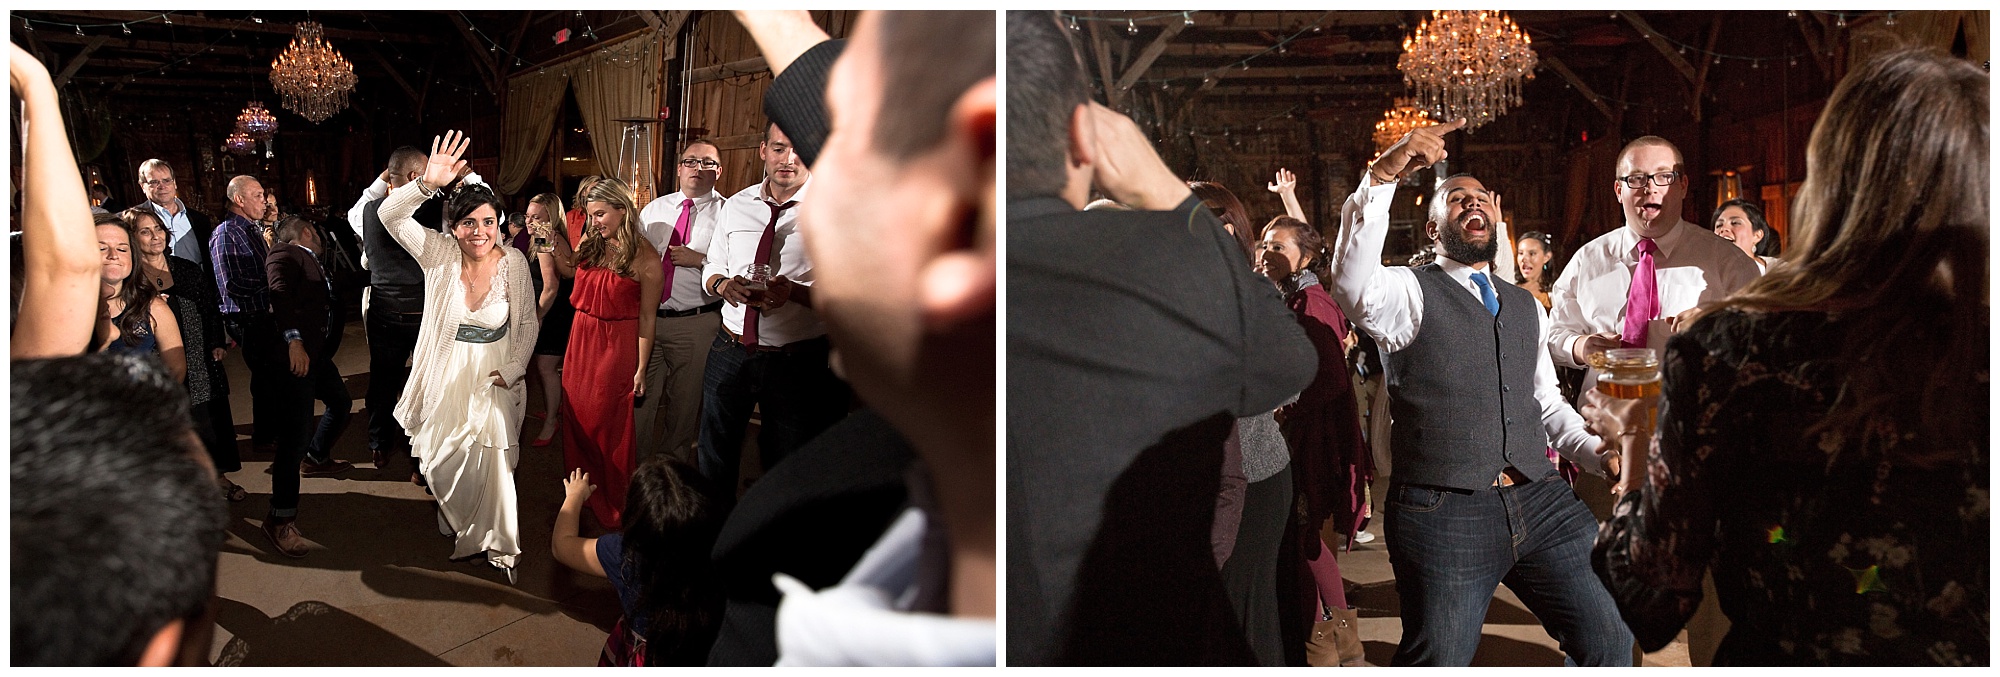 Photos of dancing during a lively wedding reception.